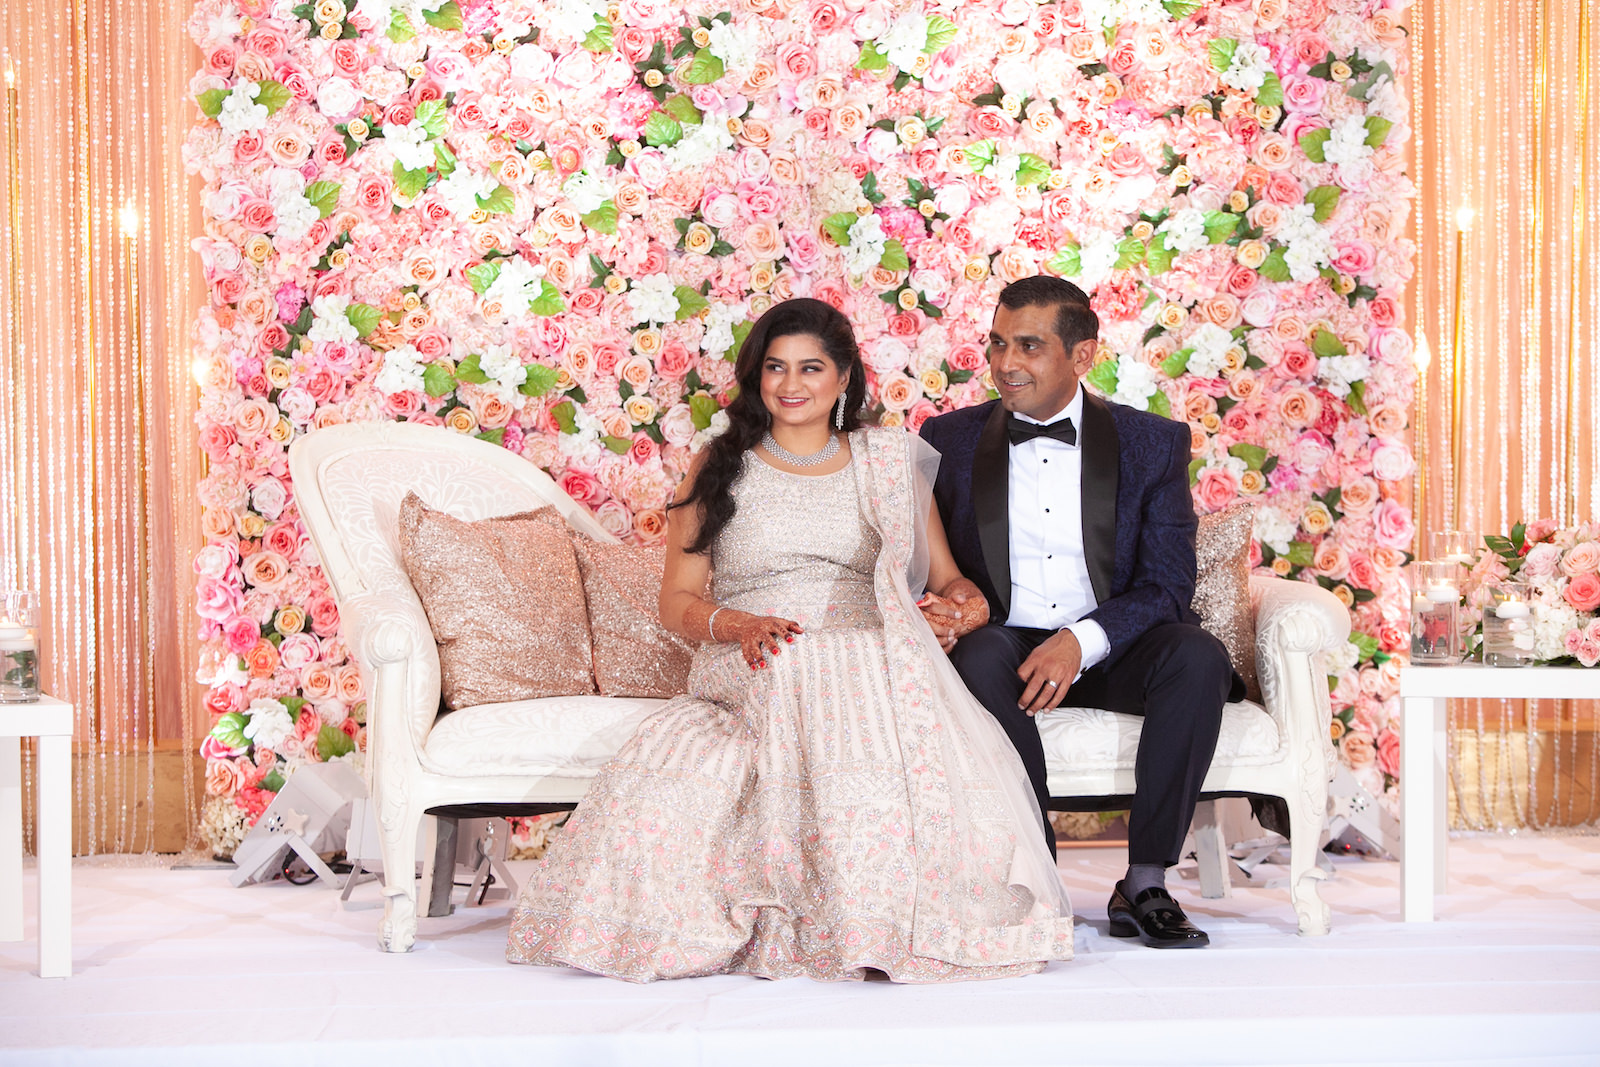 Bride and Groom Indoor Portrait at Tampa Clearwater Beach Indian Wedding Stage with Floral Wall and Twinkle Light Curtain Wall